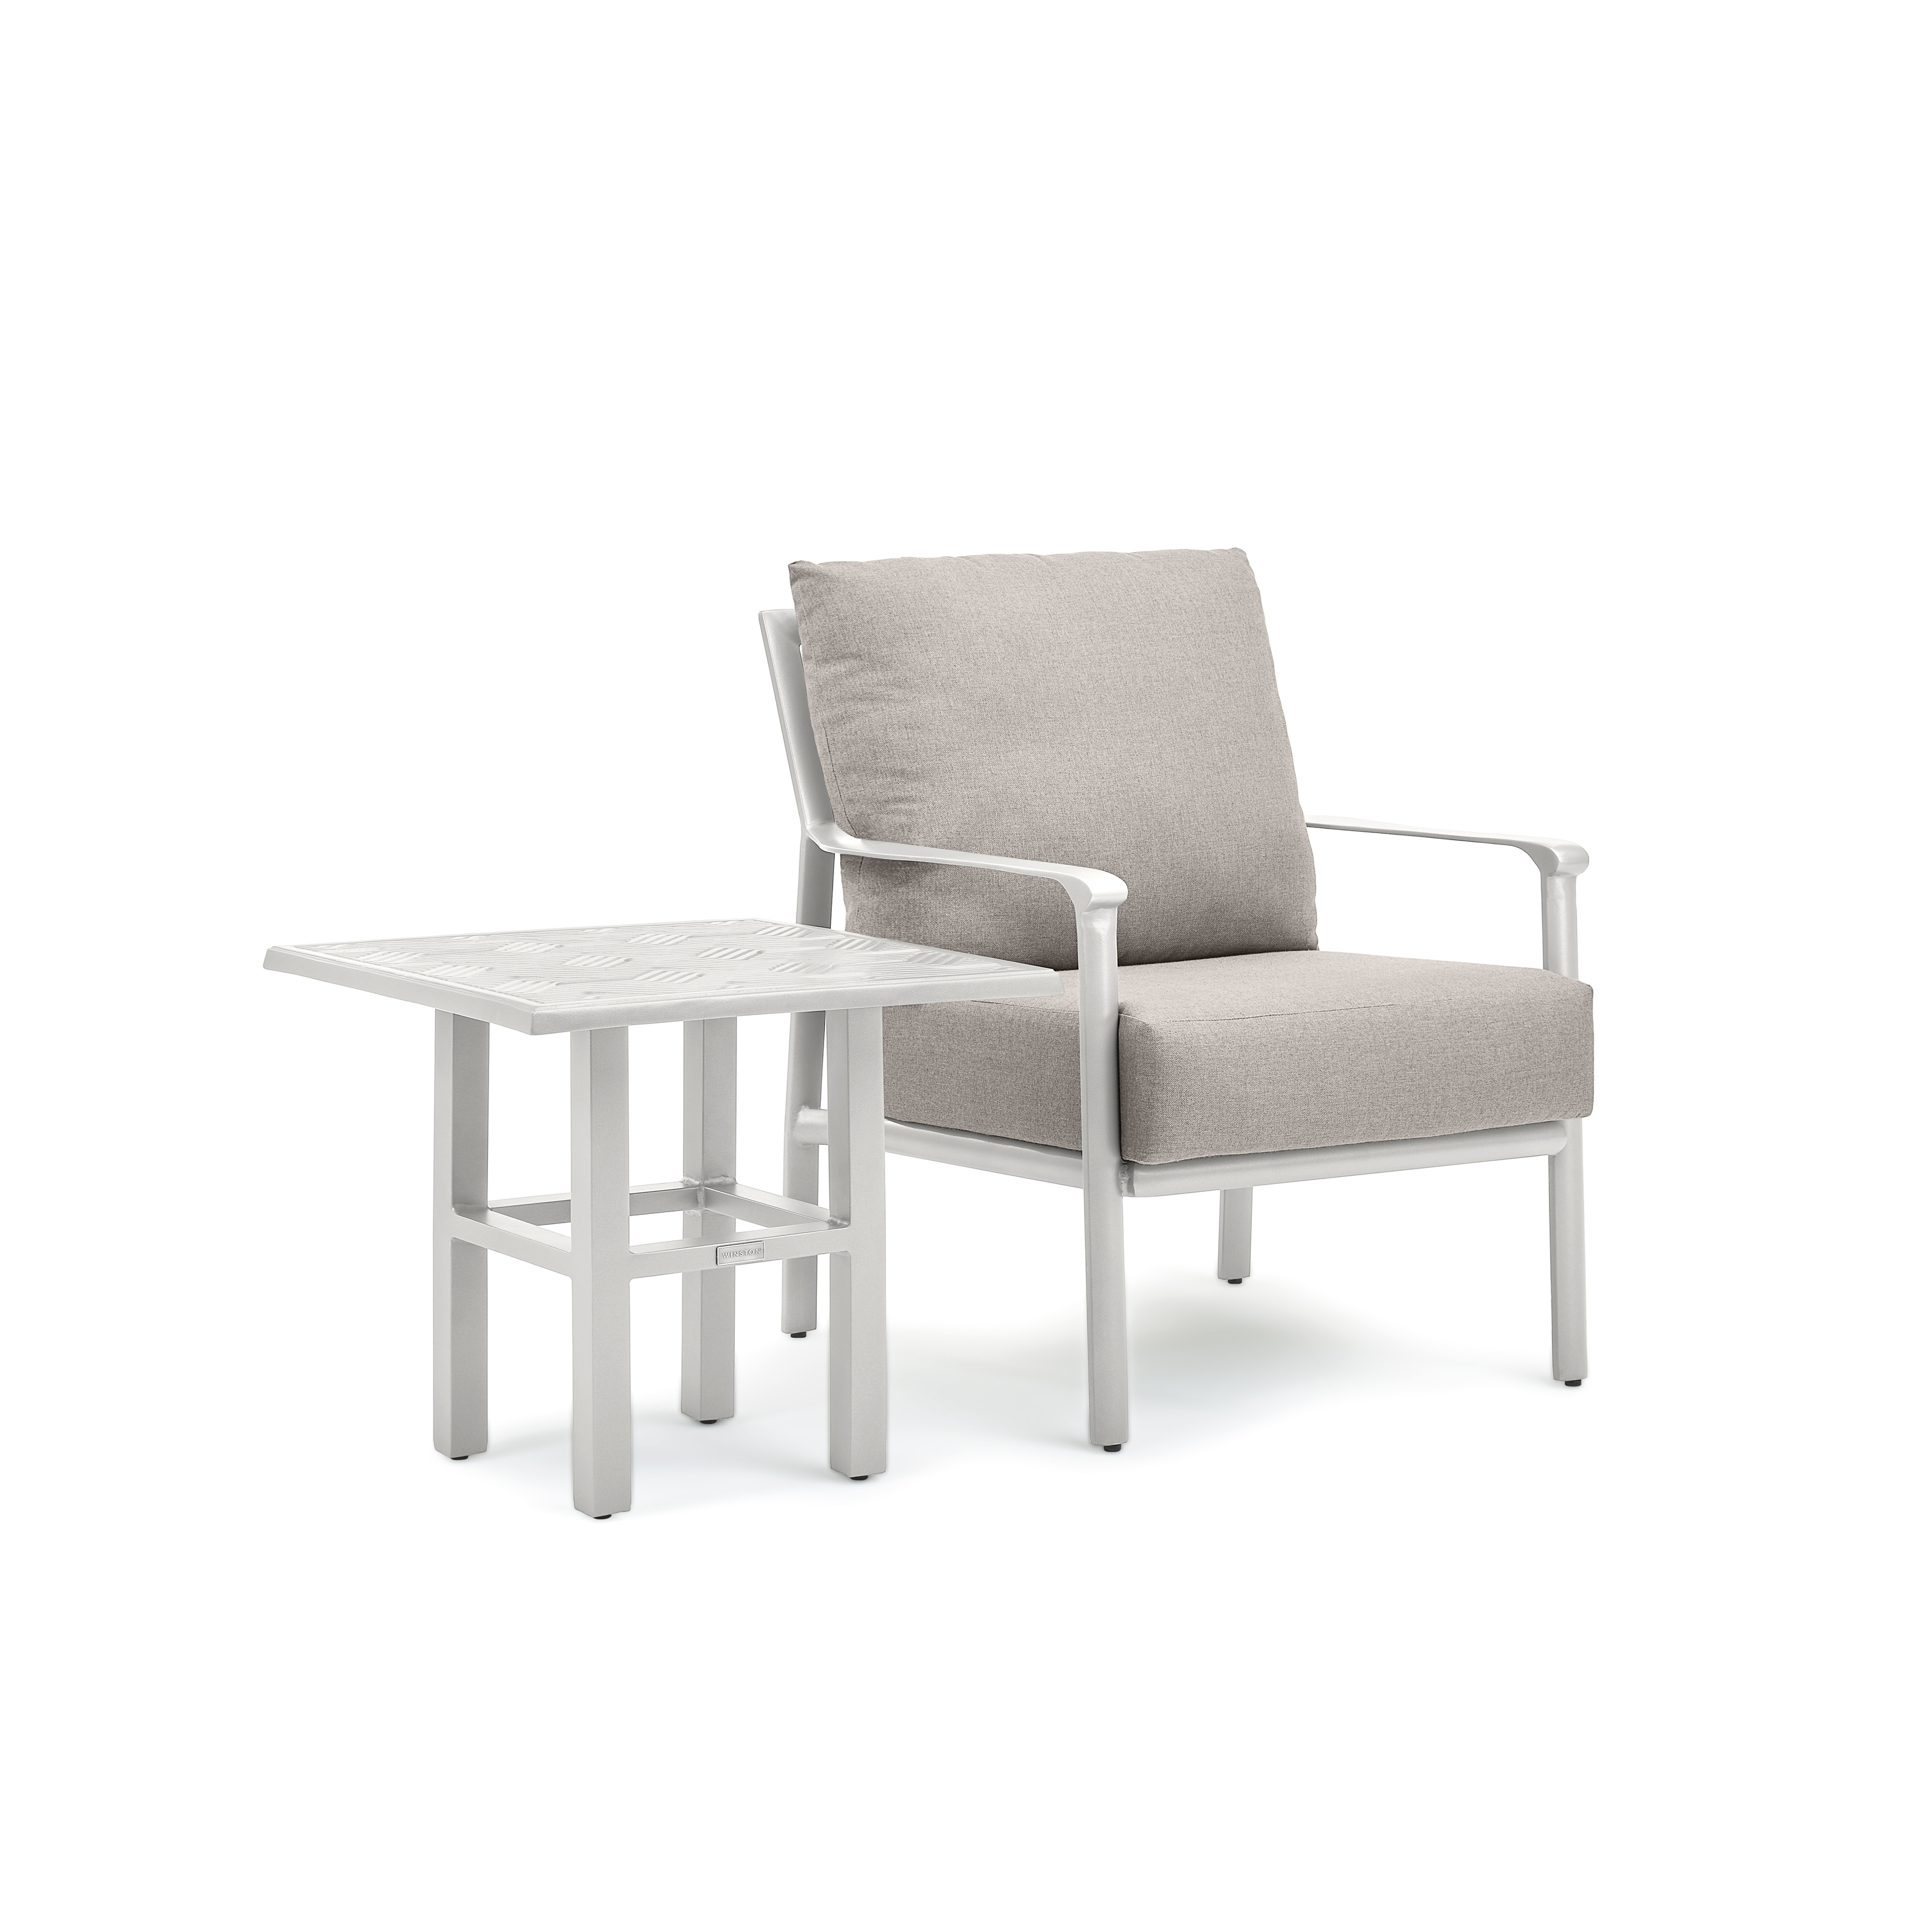 Aspen Cushion 2 Piece Seating Set With Lounge Chair and Merge Side Table